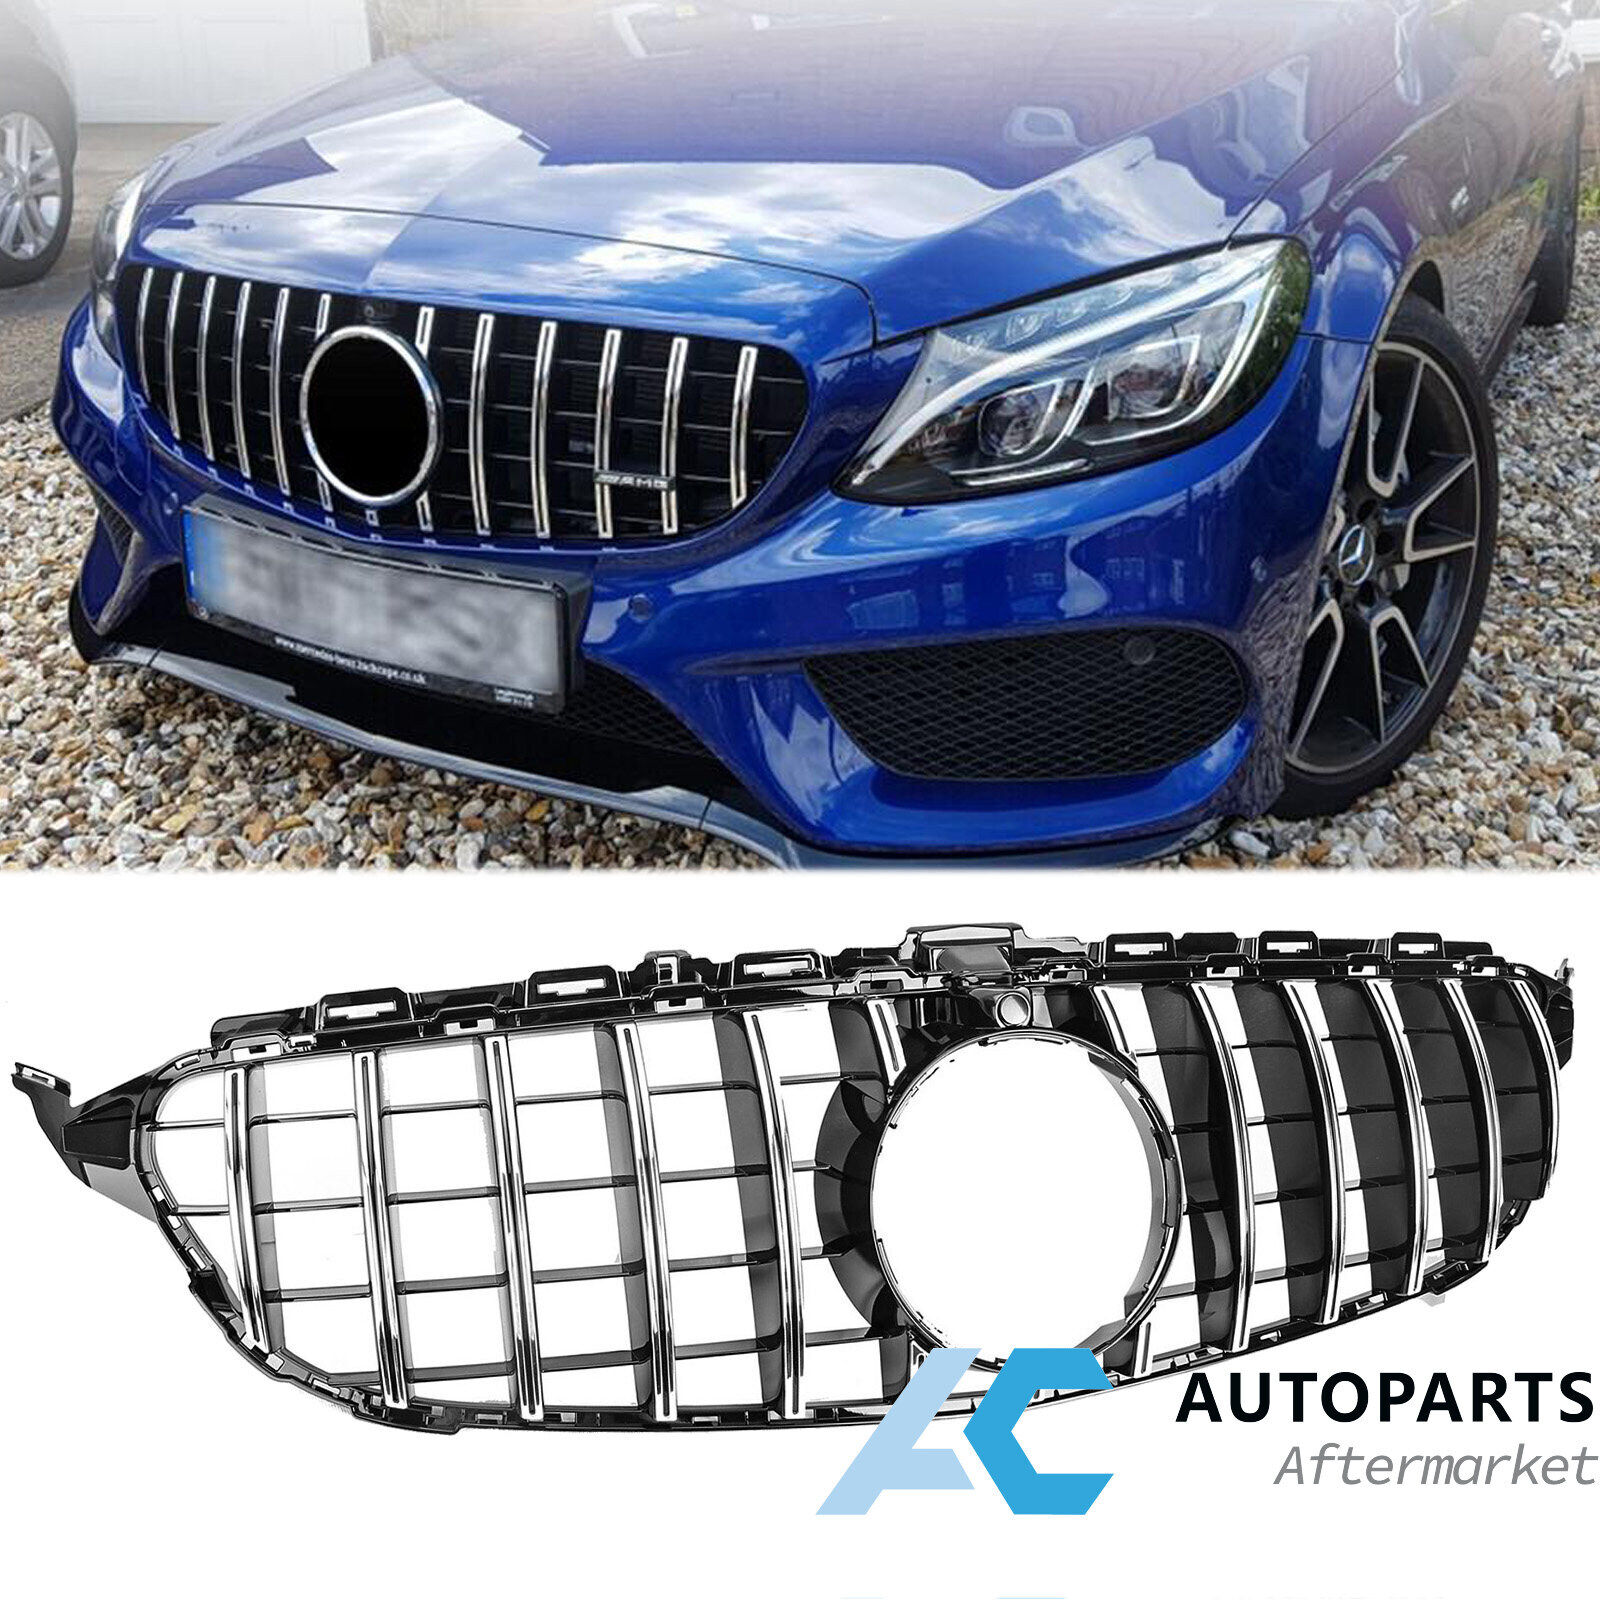 GT R AMG Style Grill Bumper Grille W/Camera for Mercedes Benz W205 C250 C300